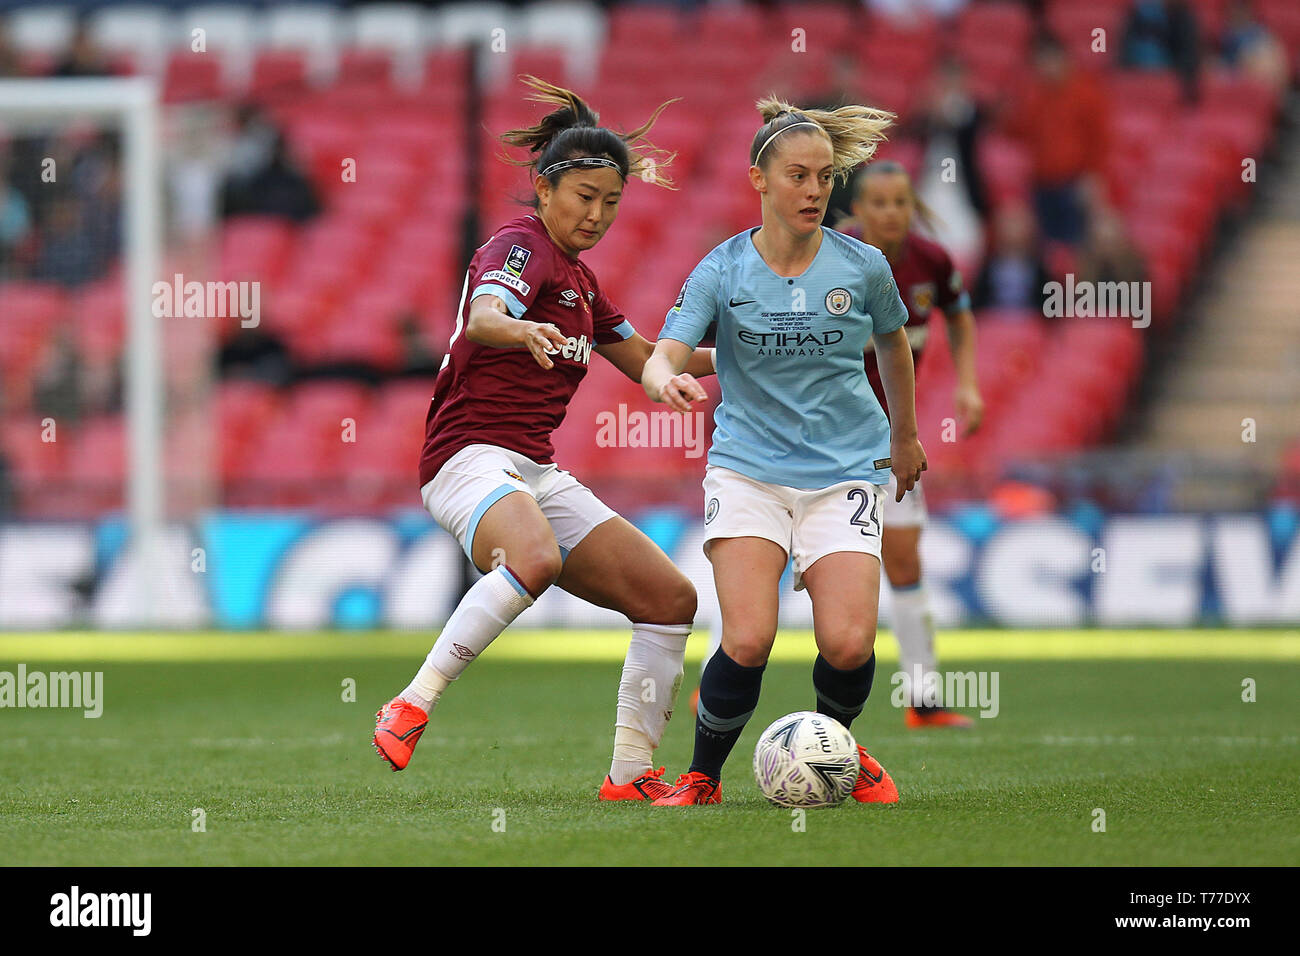 London, UK. 04th May, 2019. Cho So-Hyun of West Ham United and Keira Walsh of Manchester City during the FA Women's Cup Final match between Manchester City Women and West Ham United Ladies at Wembley Stadium on May 4th 2019 in London, England. Credit: PHC Images/Alamy Live News Stock Photo